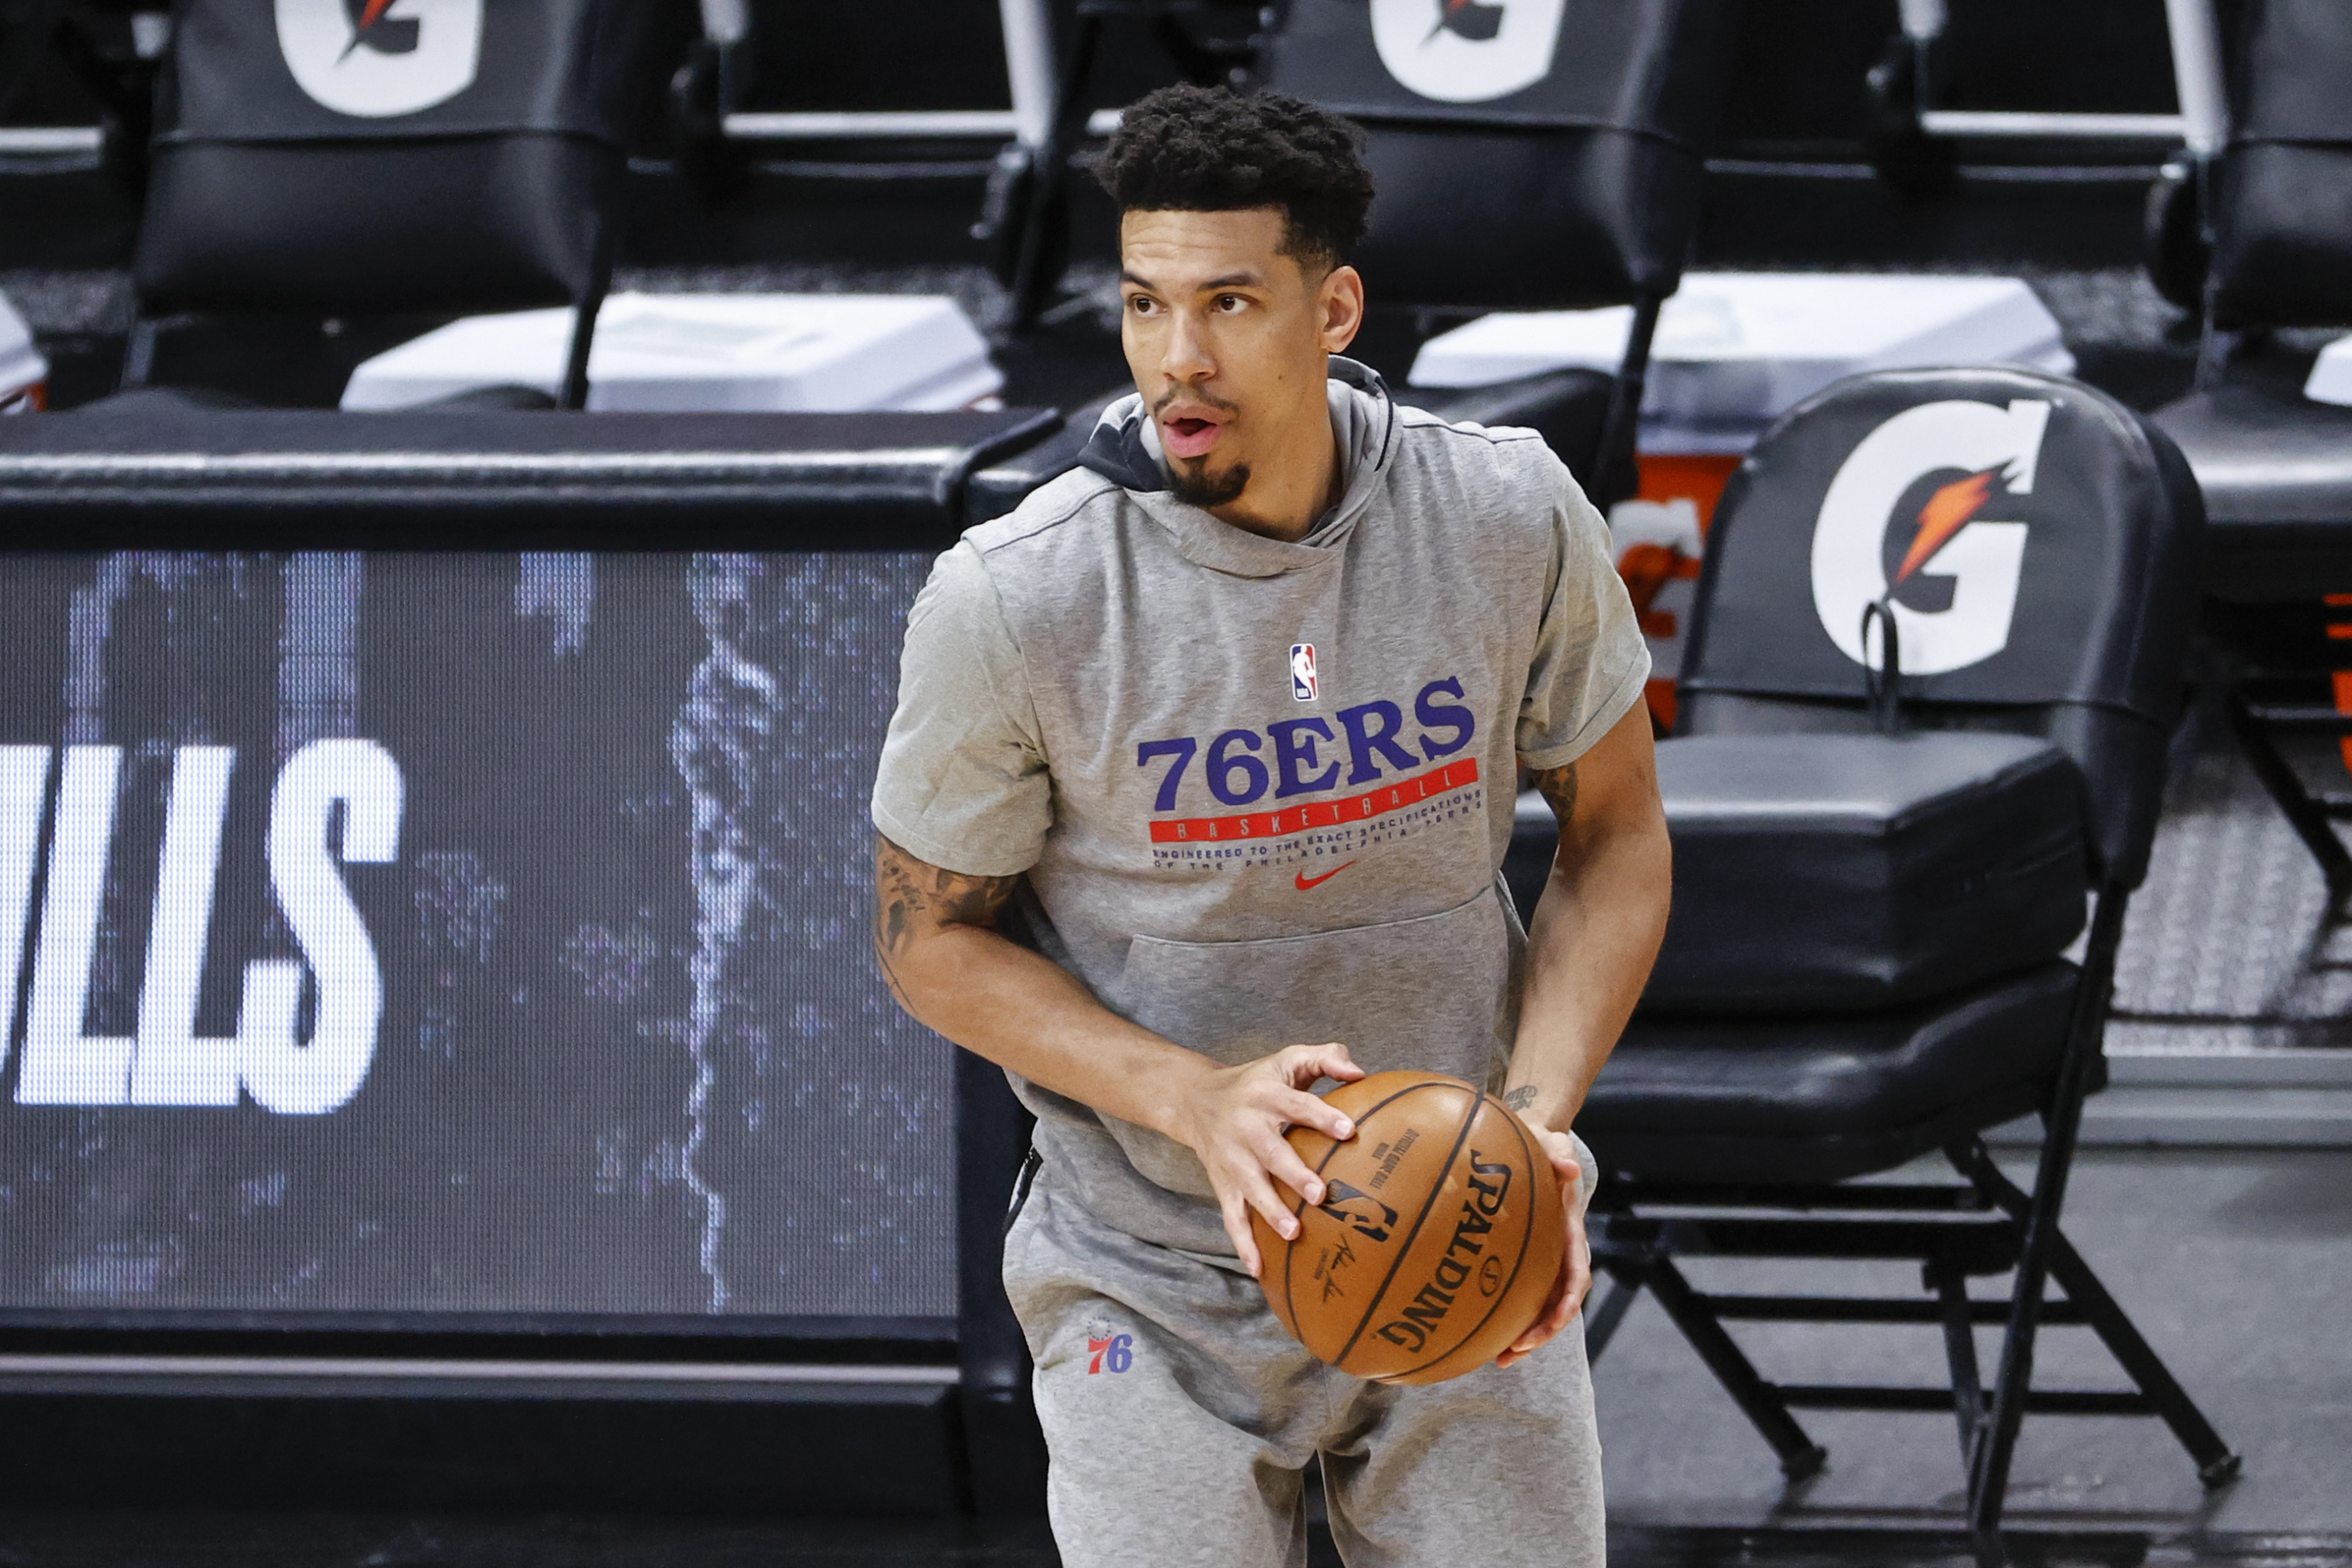 NBA Free Agency: Danny Green Signs with Philadelphia 76ers on 1